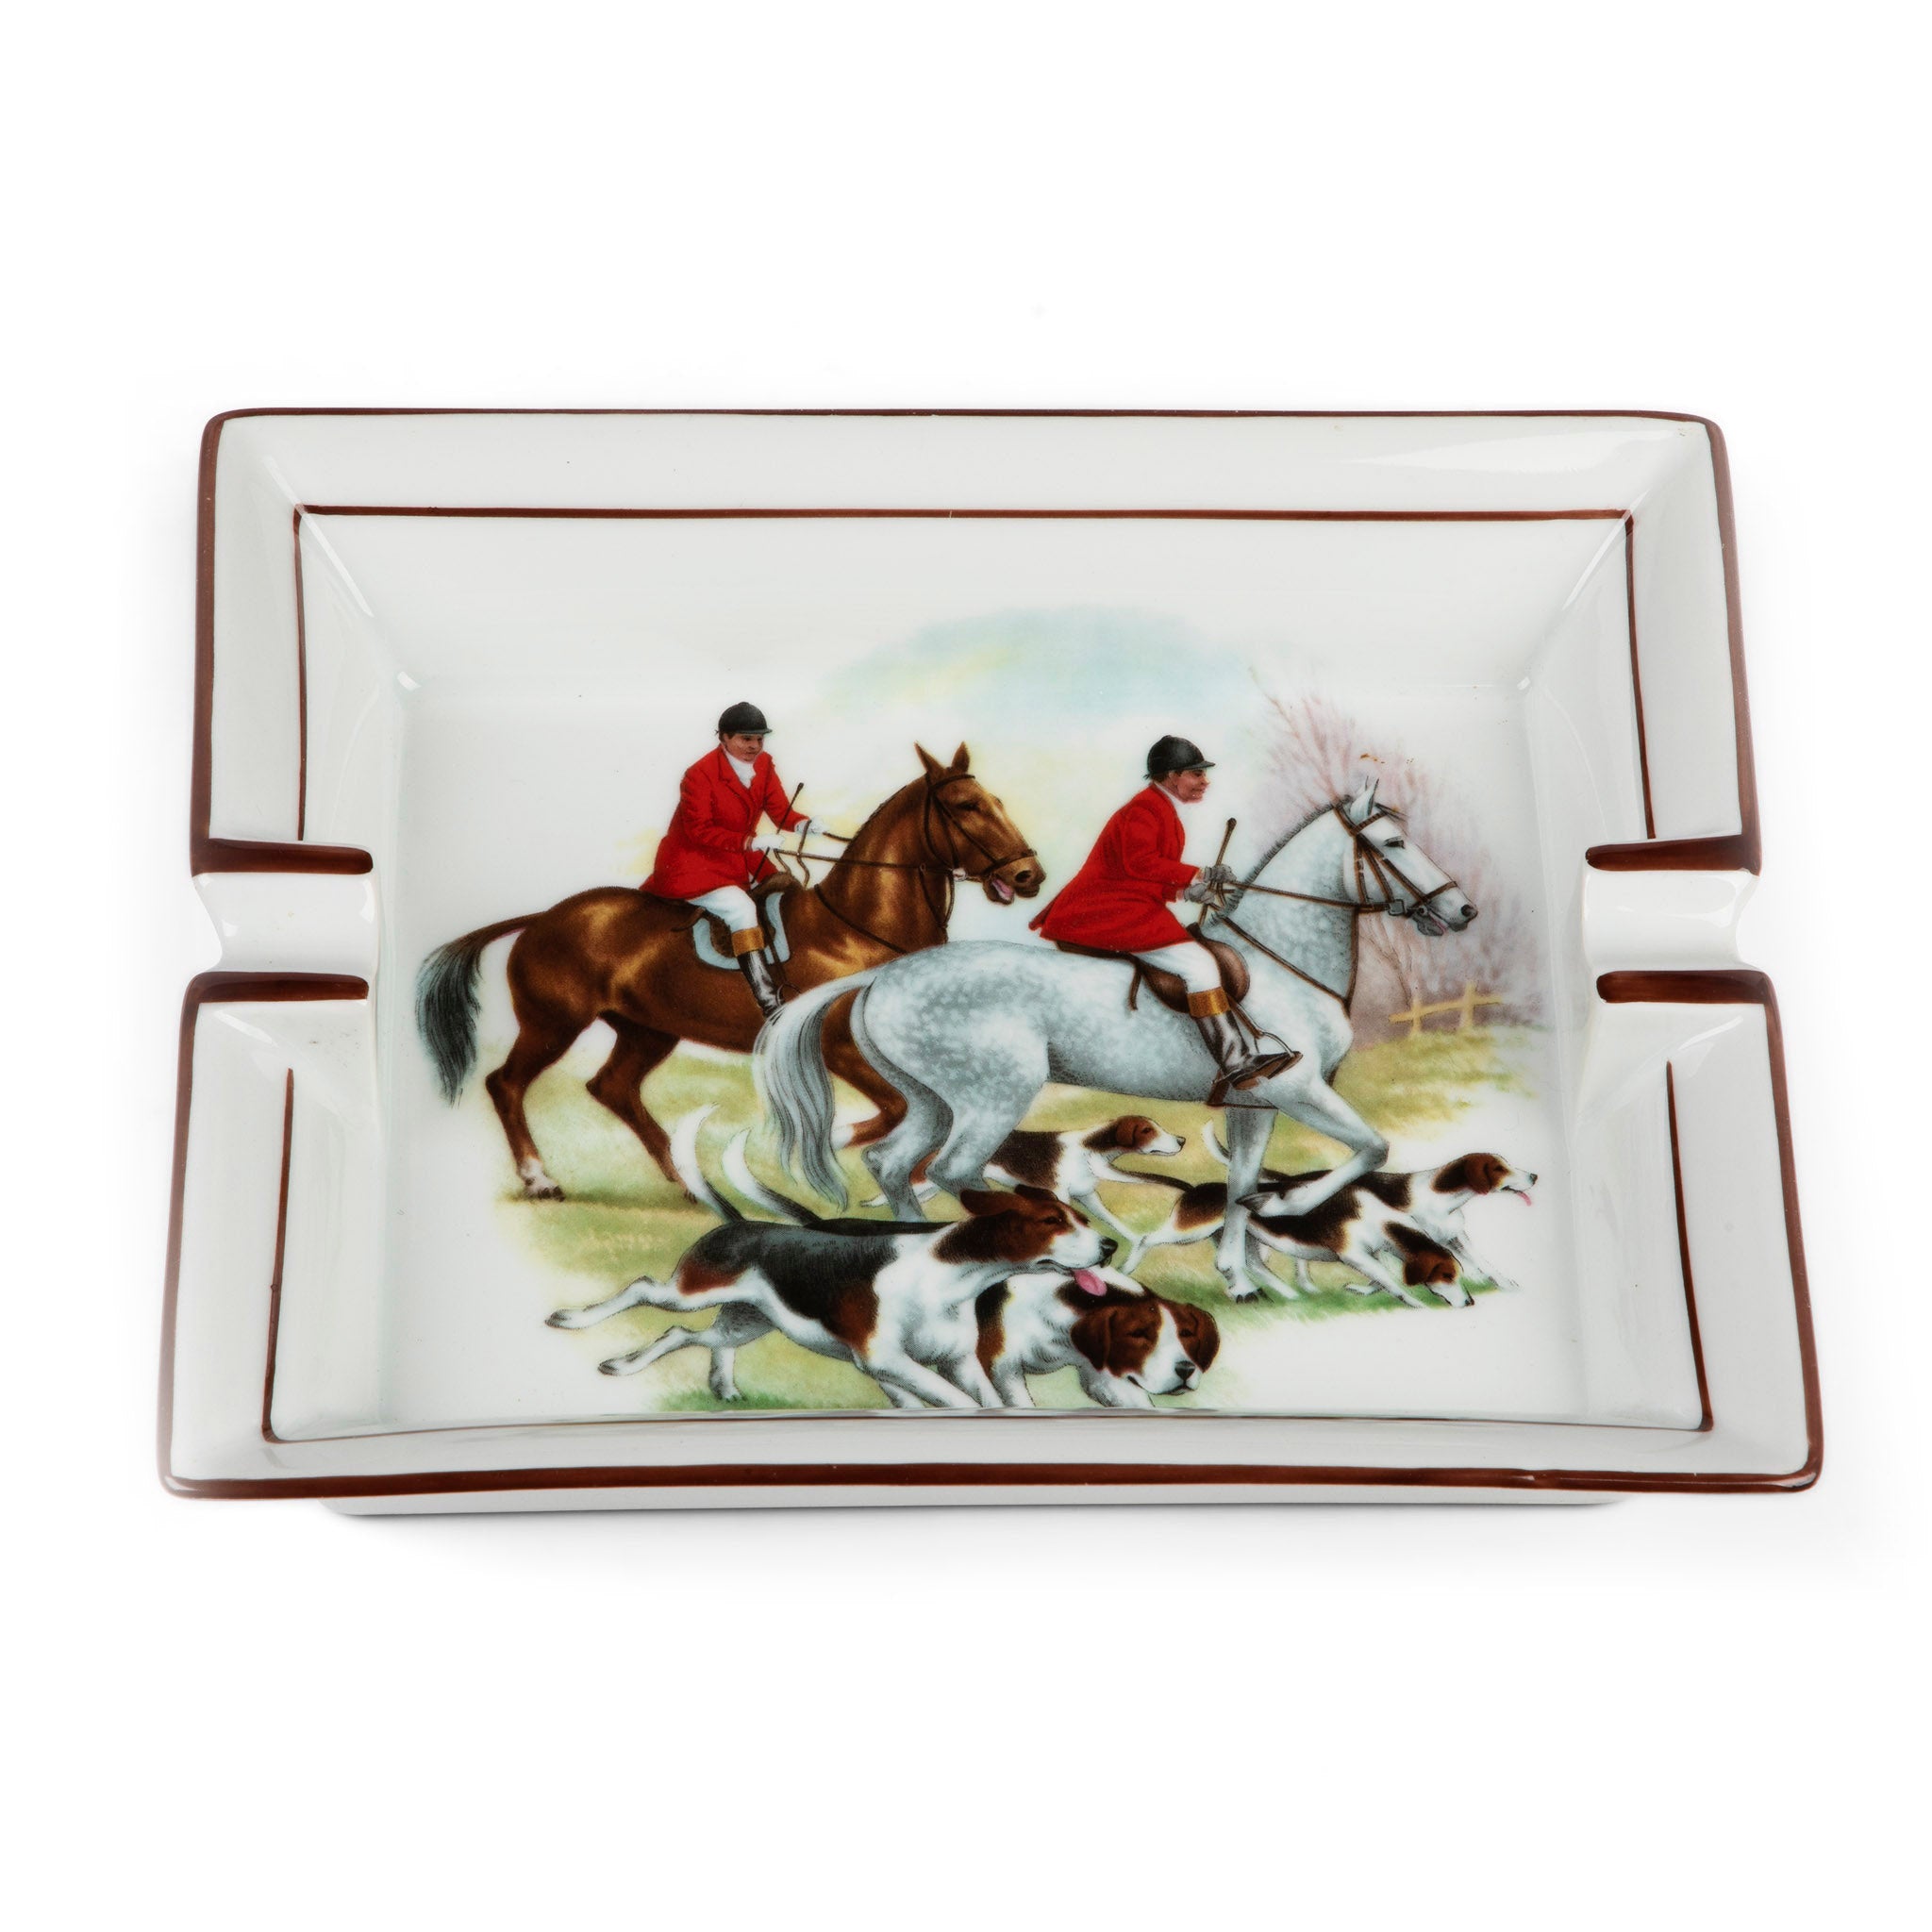 Abercrombie & Fitch Fox Hunting Scene Ashtray